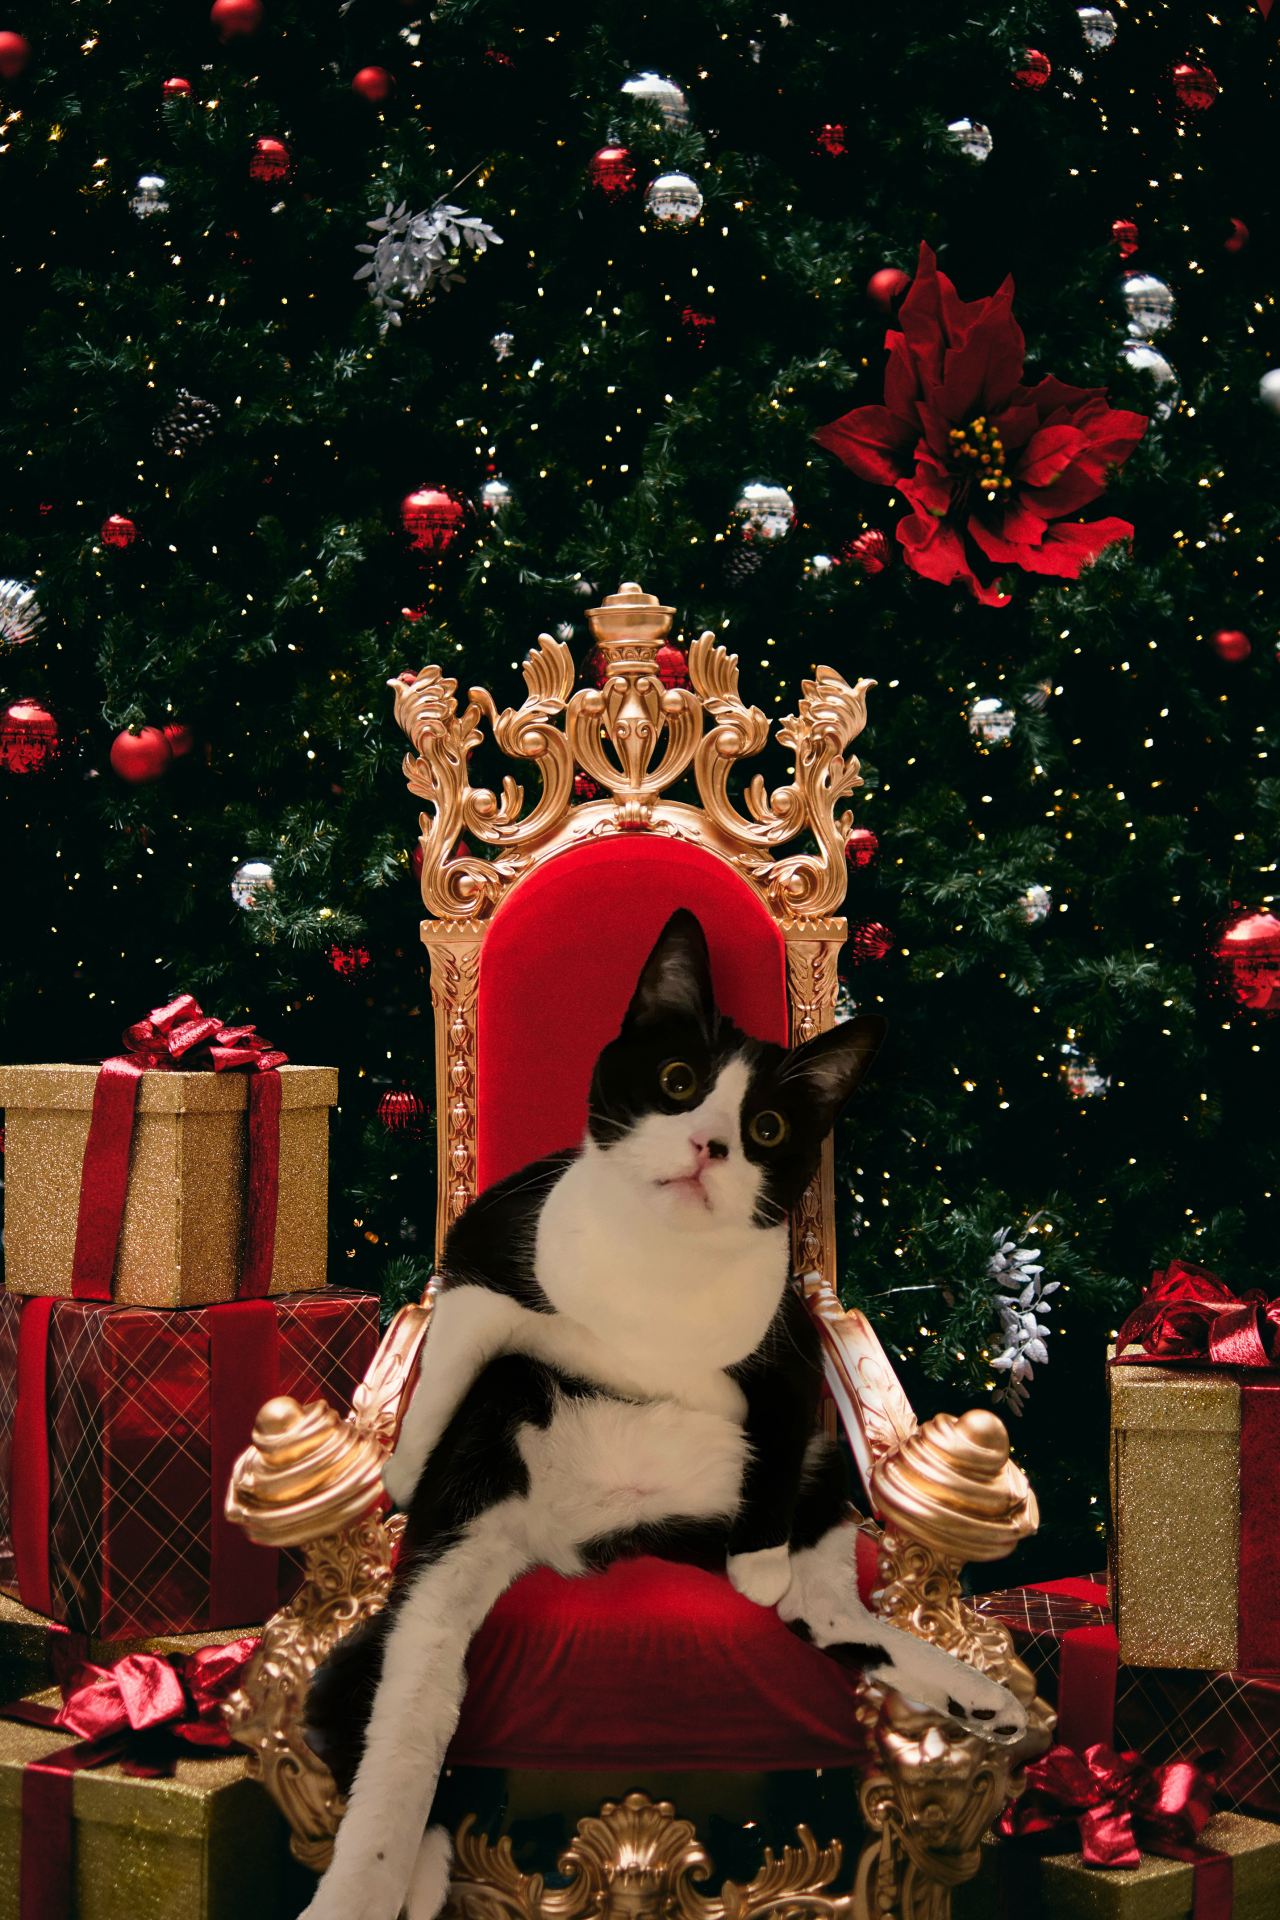 tuxedo cat sitting on a holiday throne